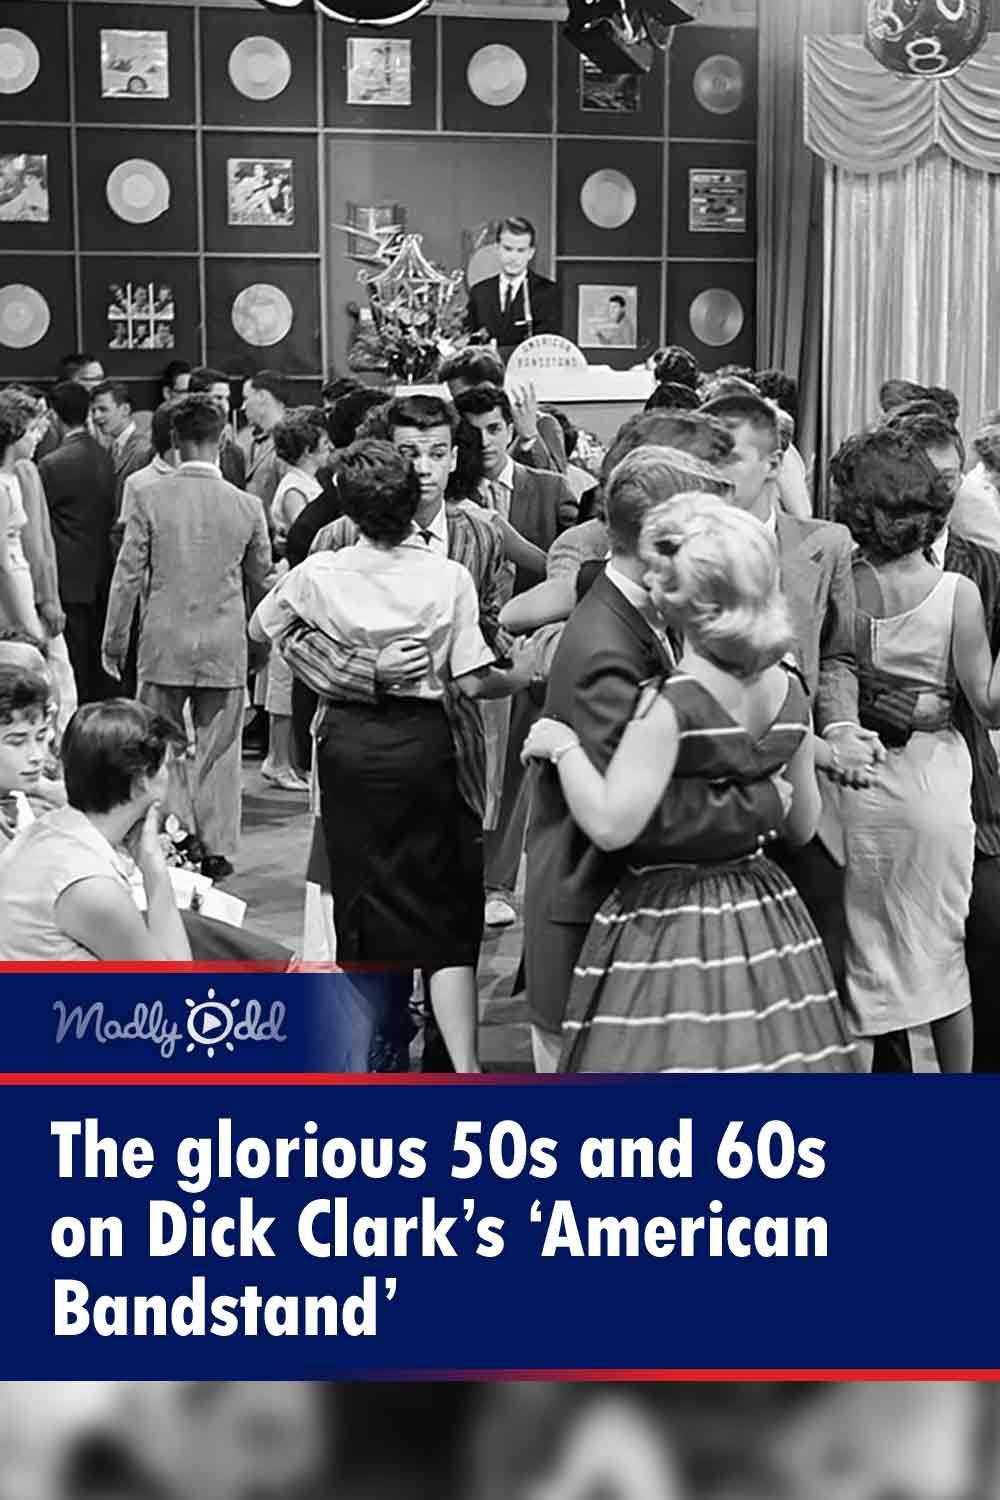 The glorious 50s and 60s on Dick Clark’s ‘American Bandstand’